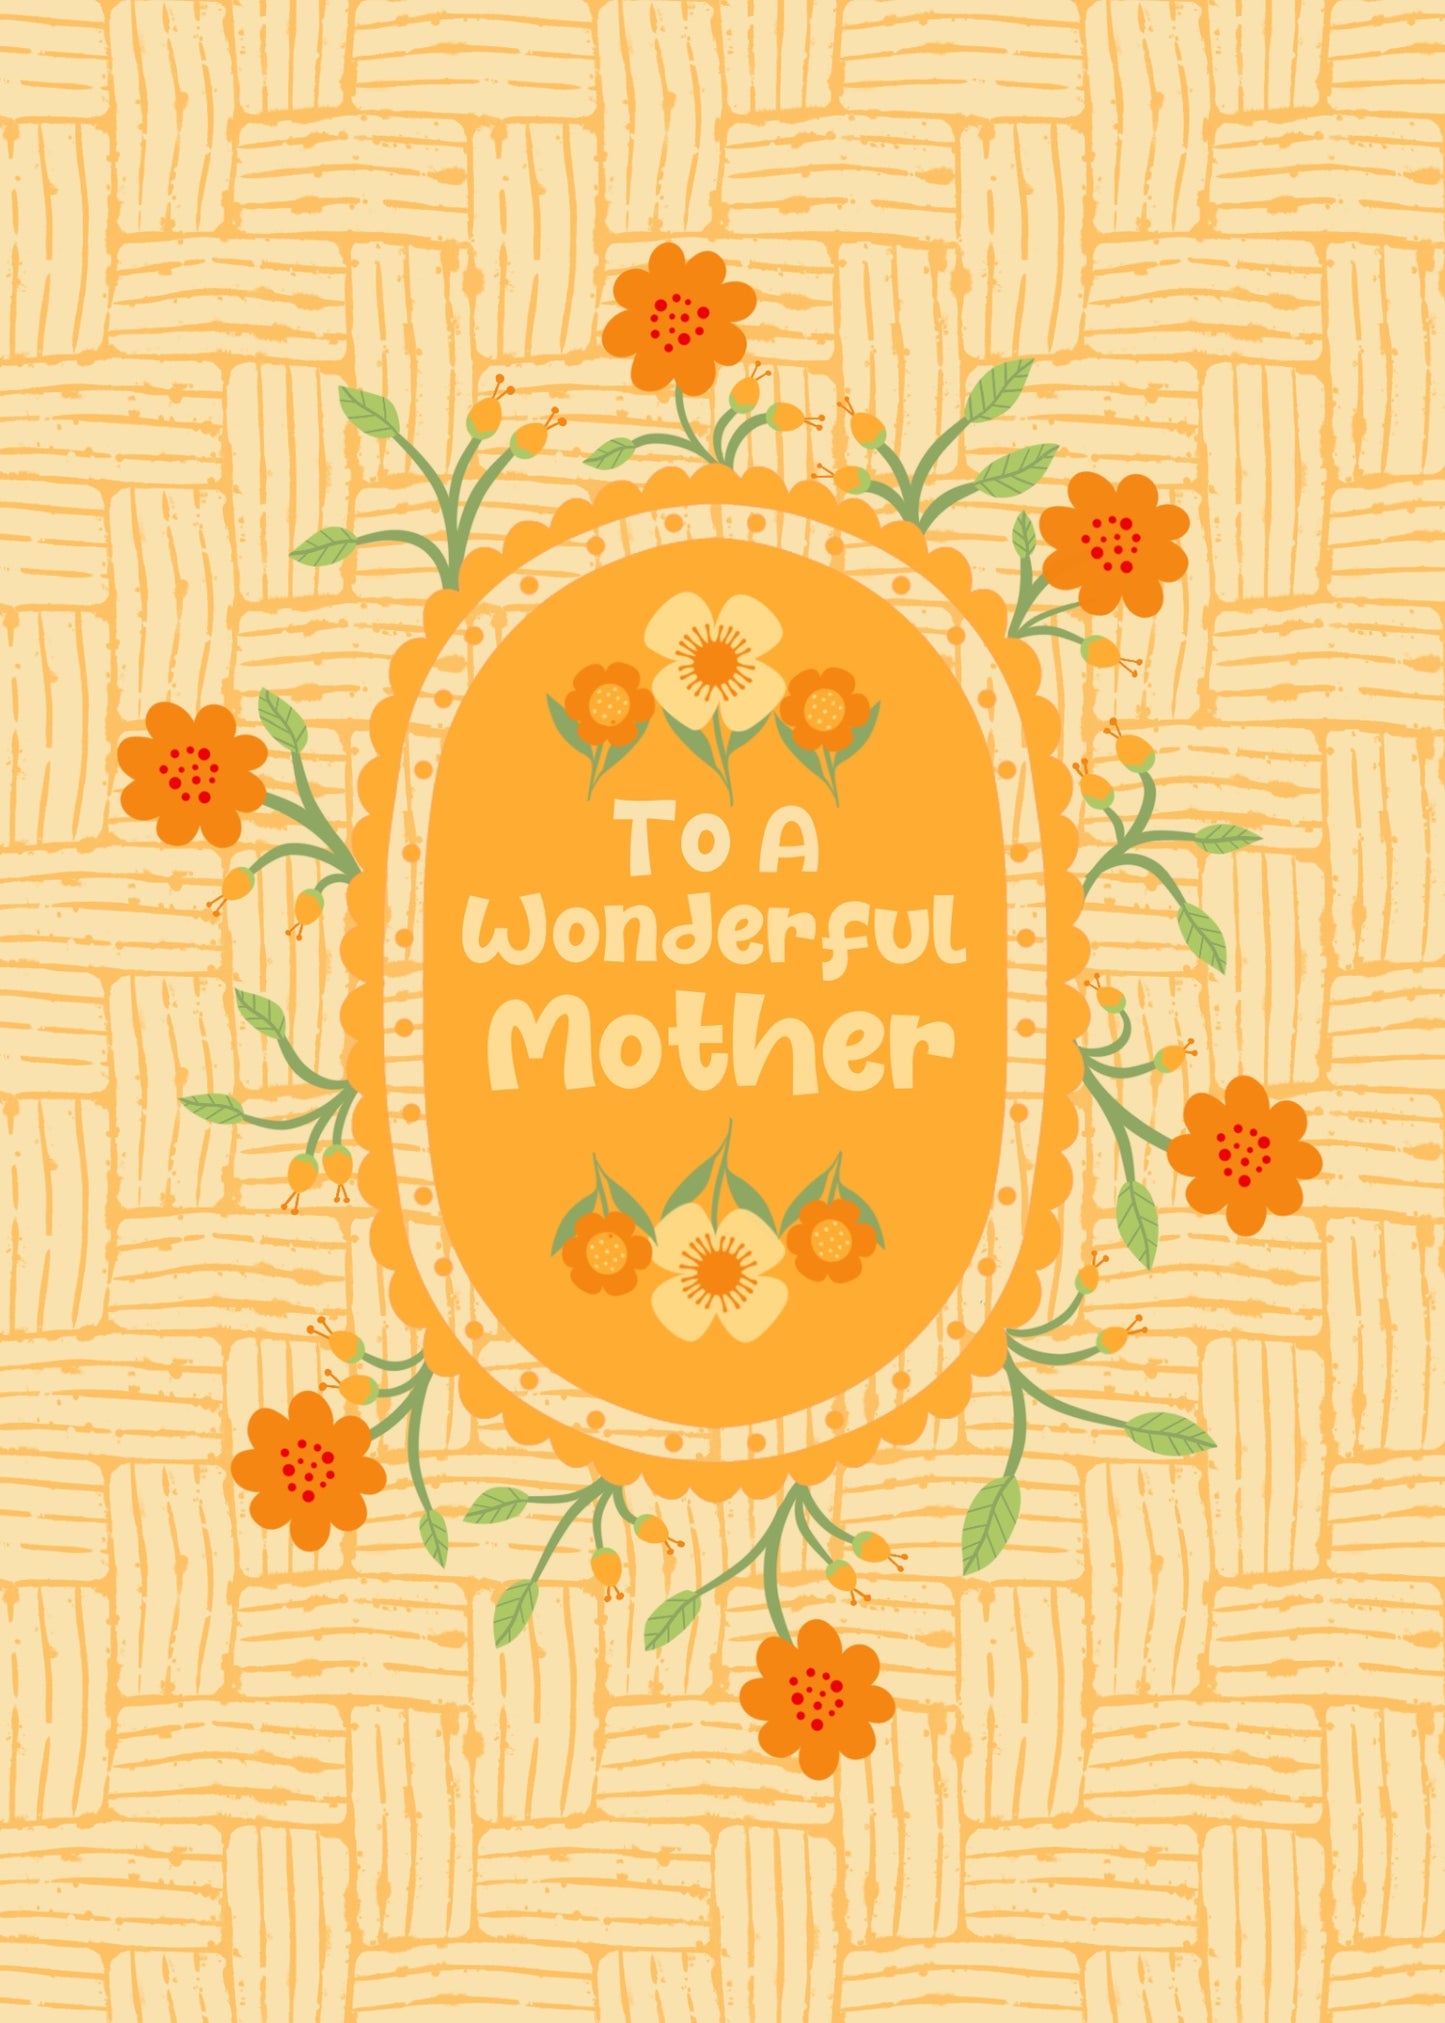 To a Wonderful Mother Mother’s Day Card - Simple Floral Design with Mom in Large Script | Instant Digital Download